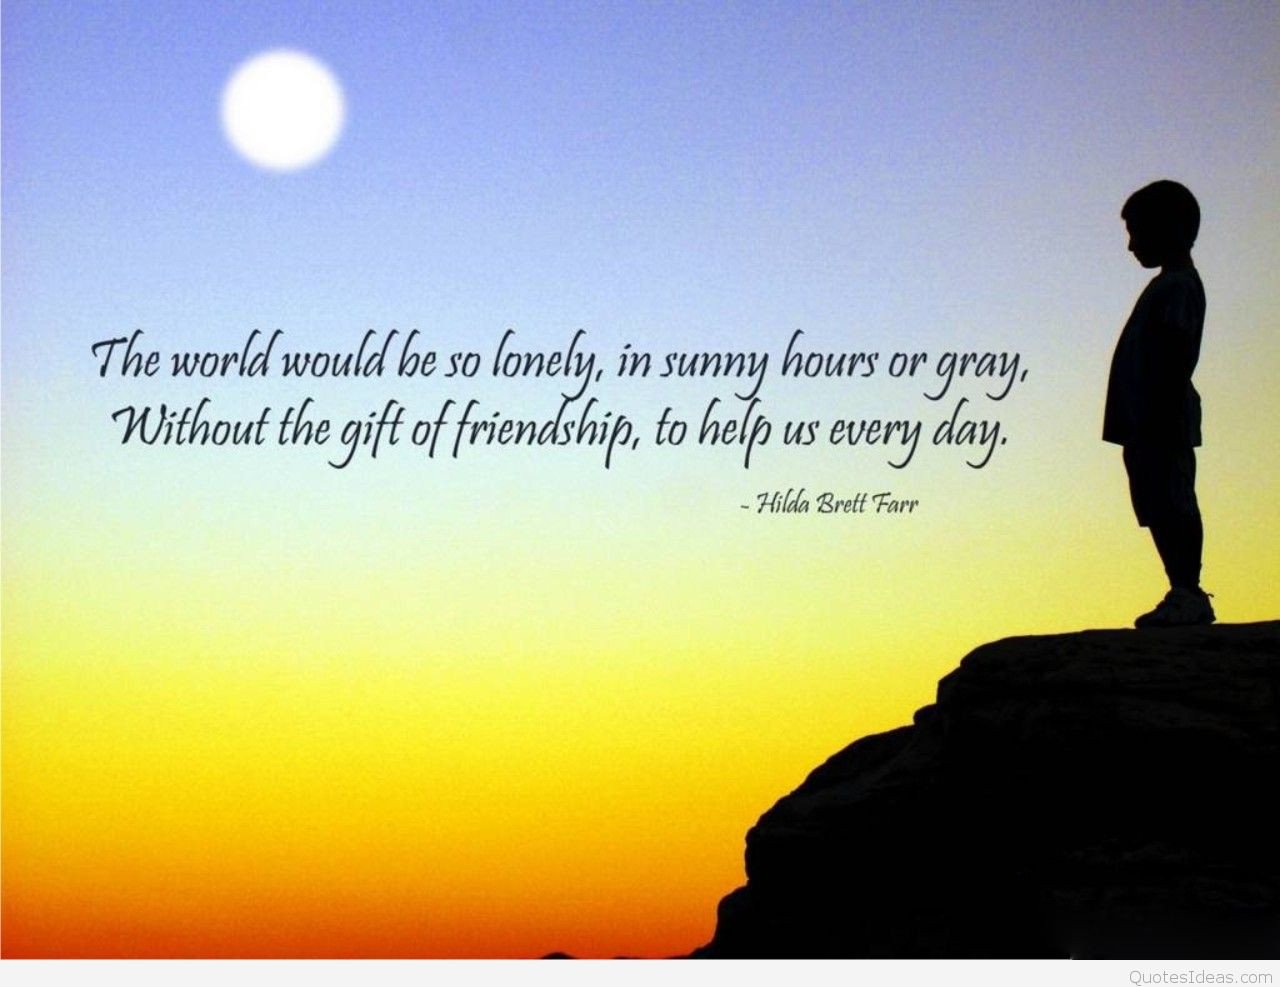 Best Friendship Day Quotes
 Friendship day quotes